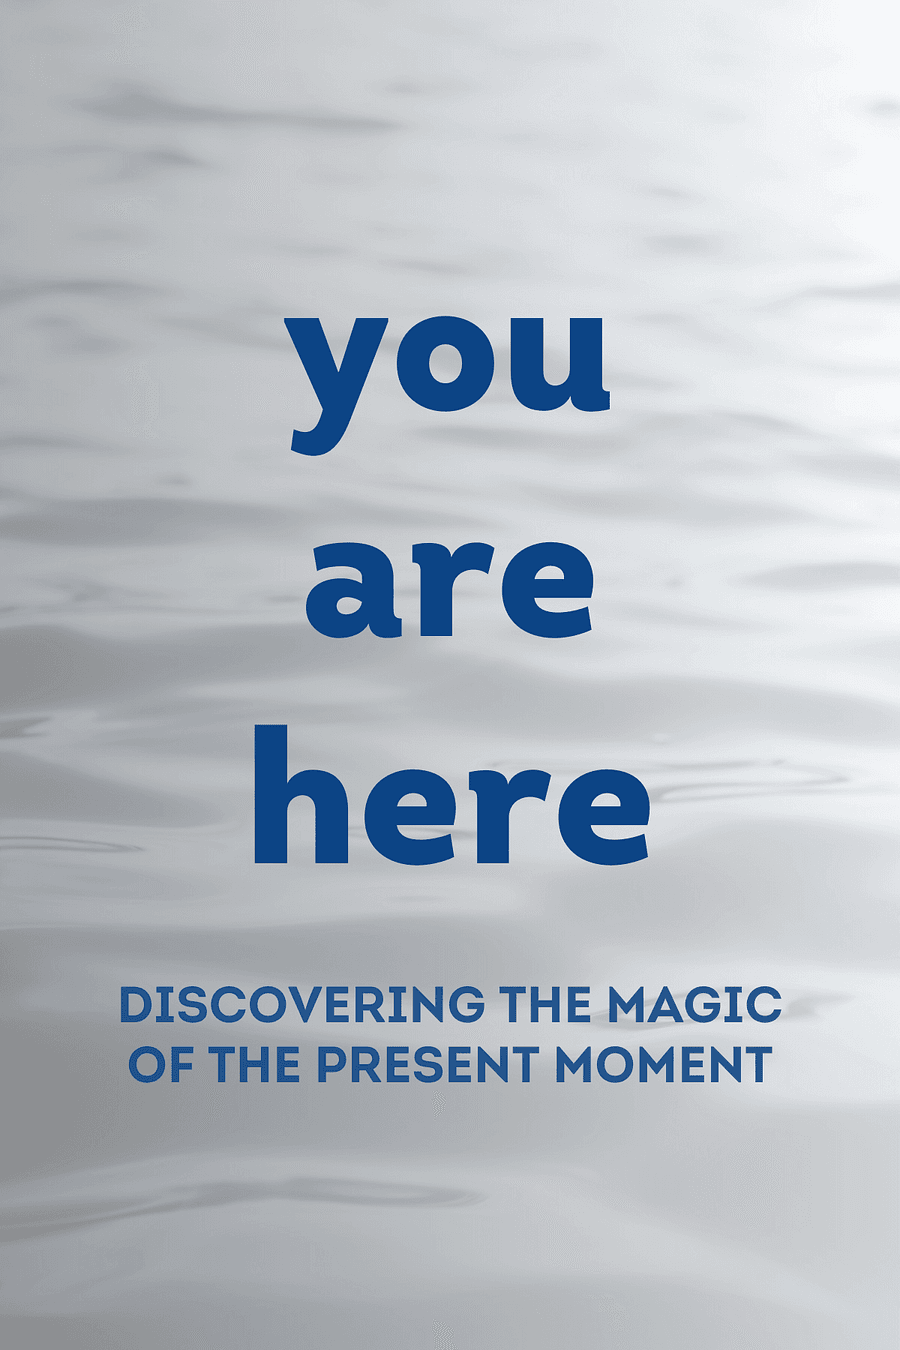 You Are Here by Thich Nhat Hanh - Book Summary